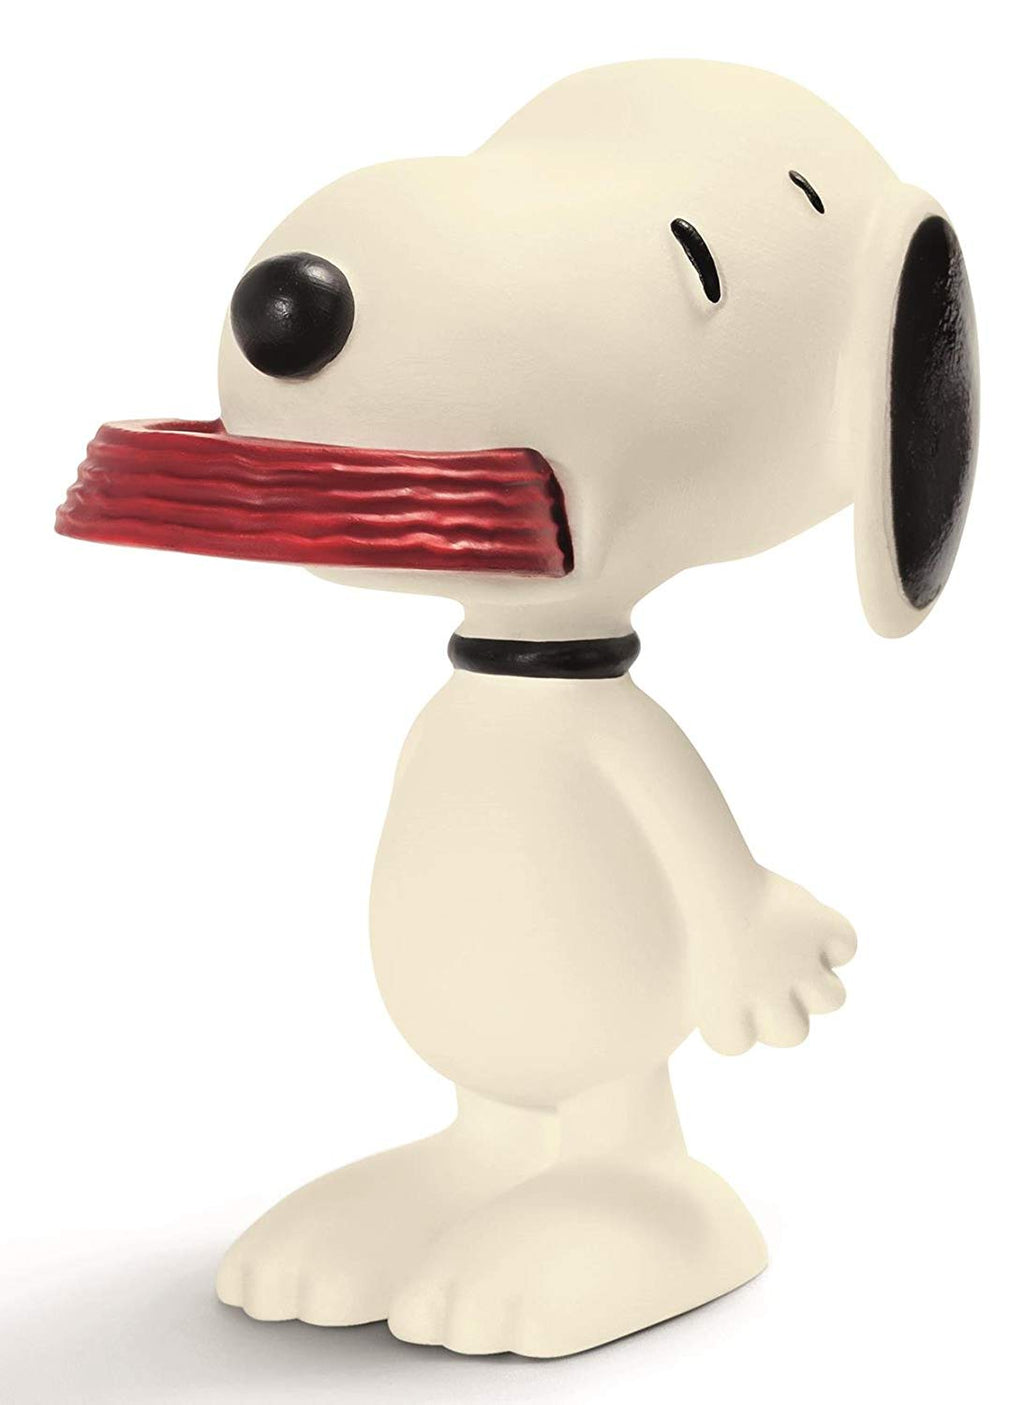 Schleich Peanuts Snoopy with His Supper Dish Figure